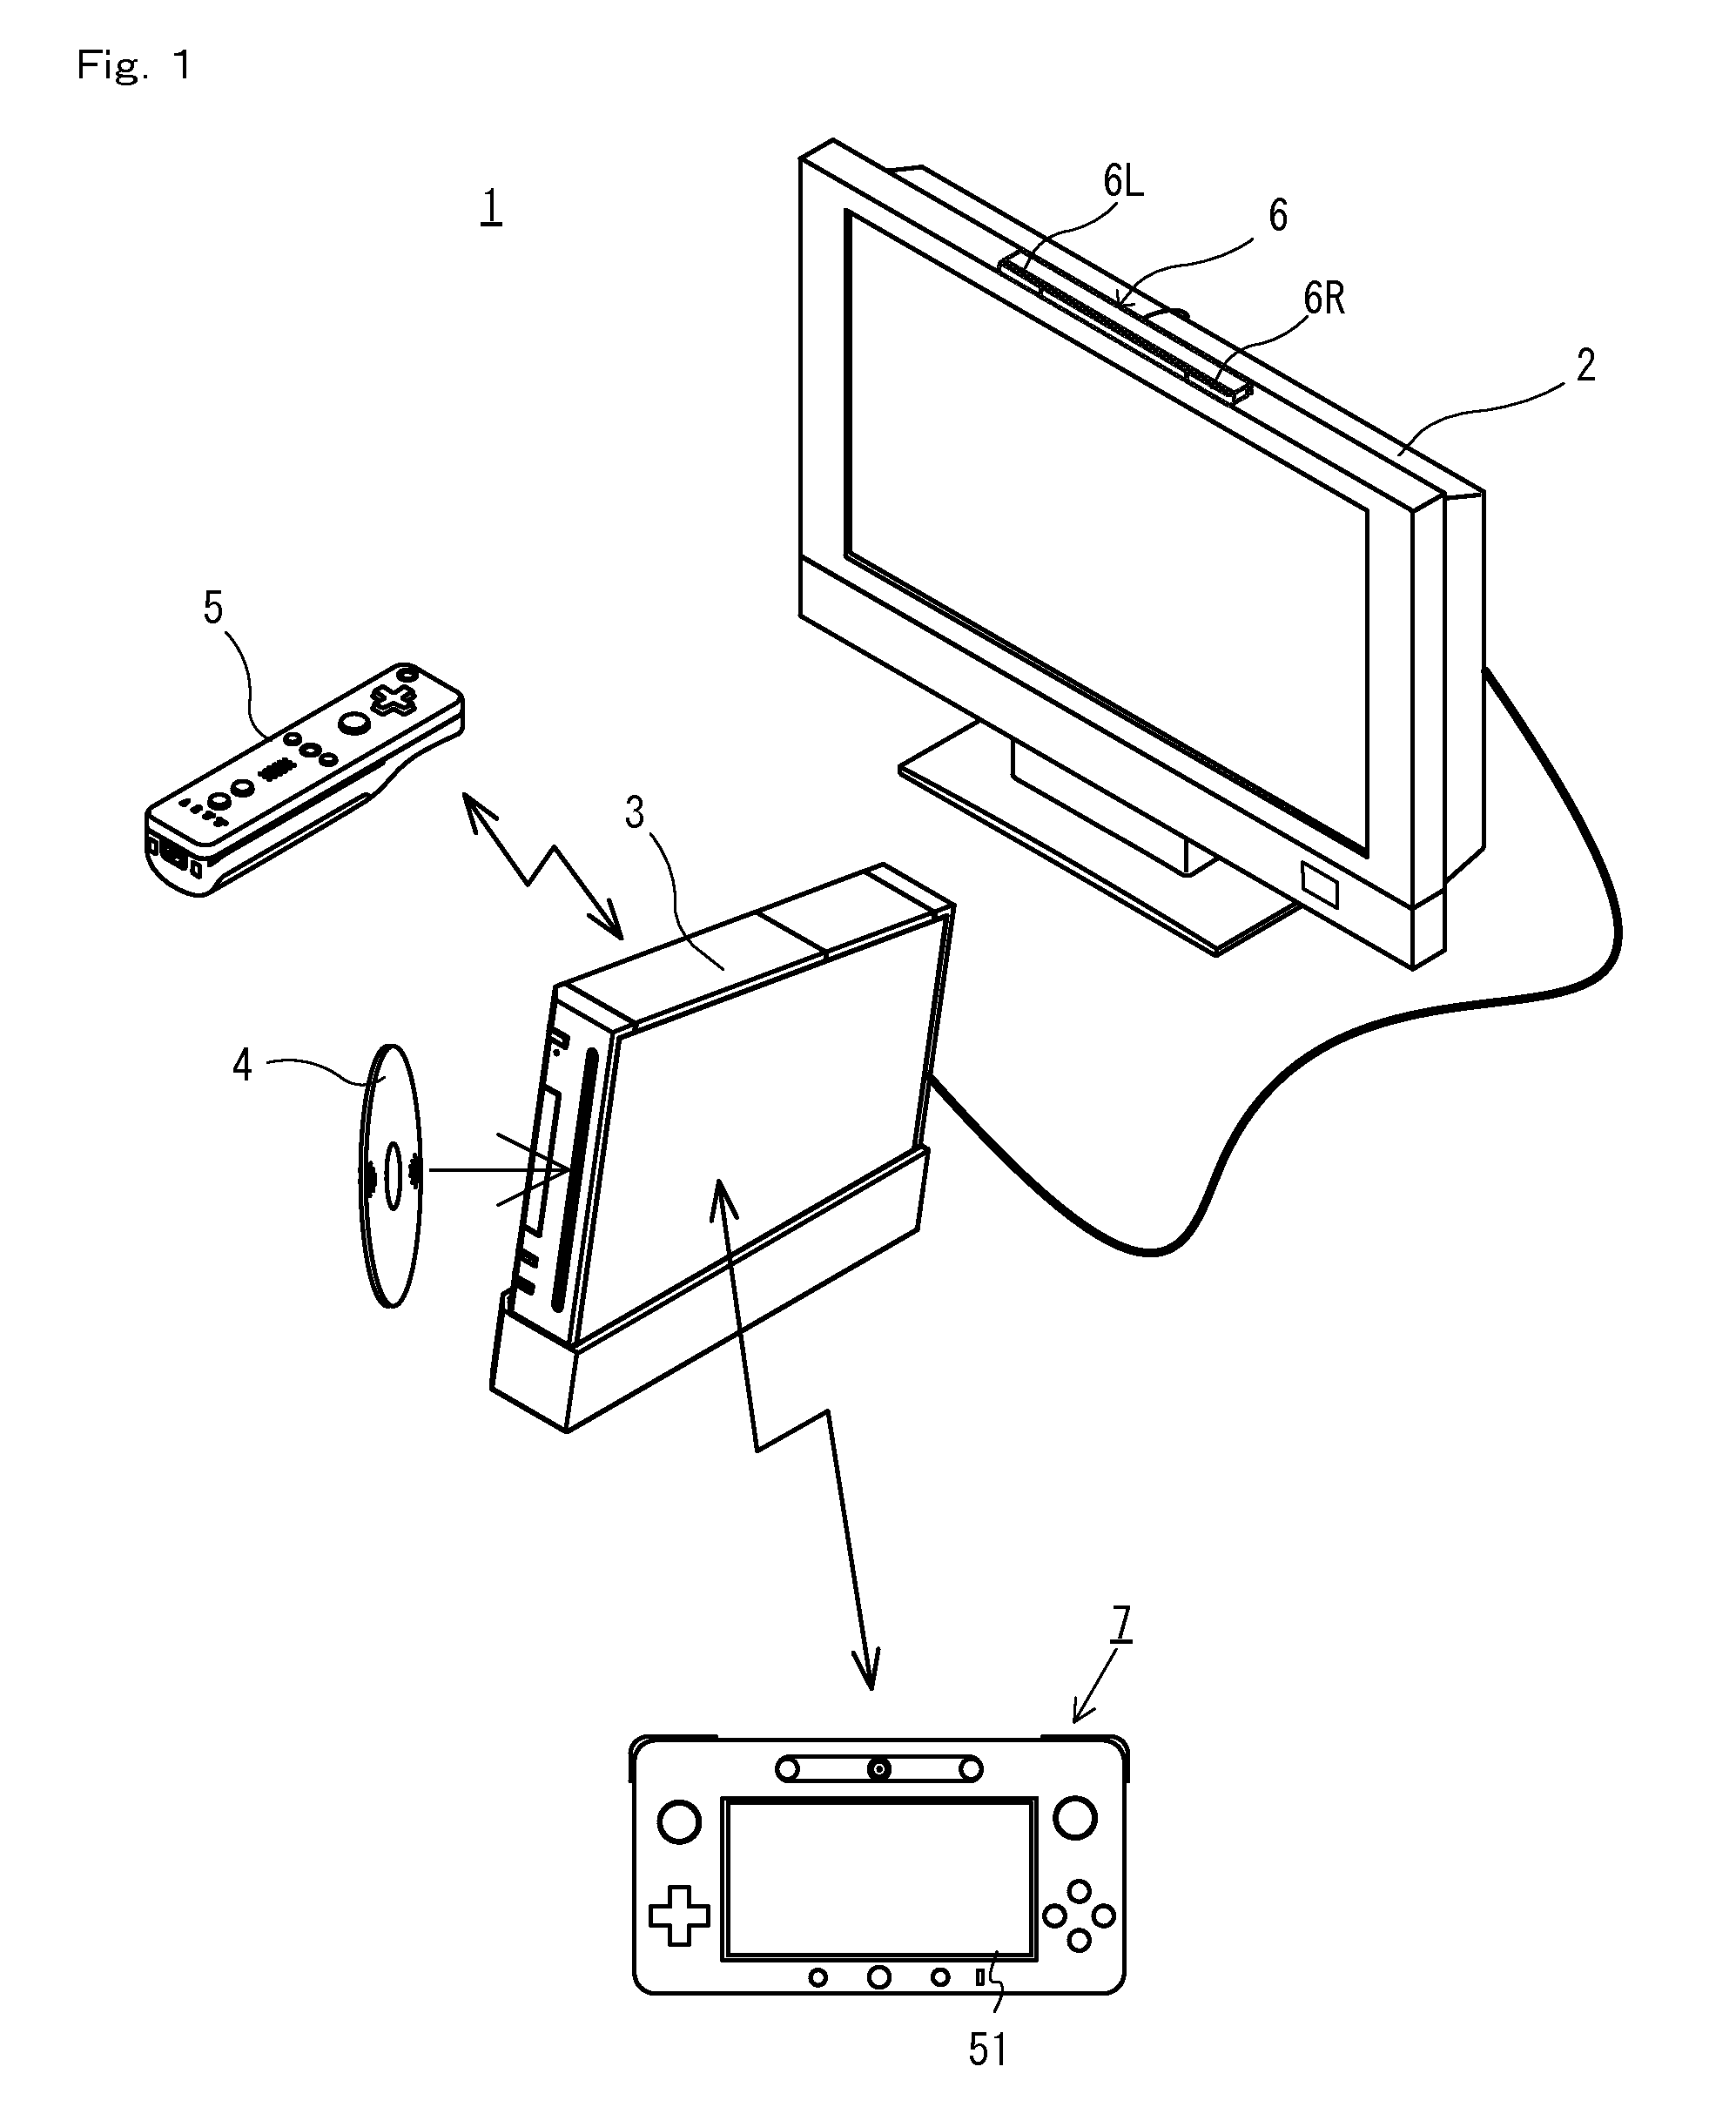 Display device, game system, and game method